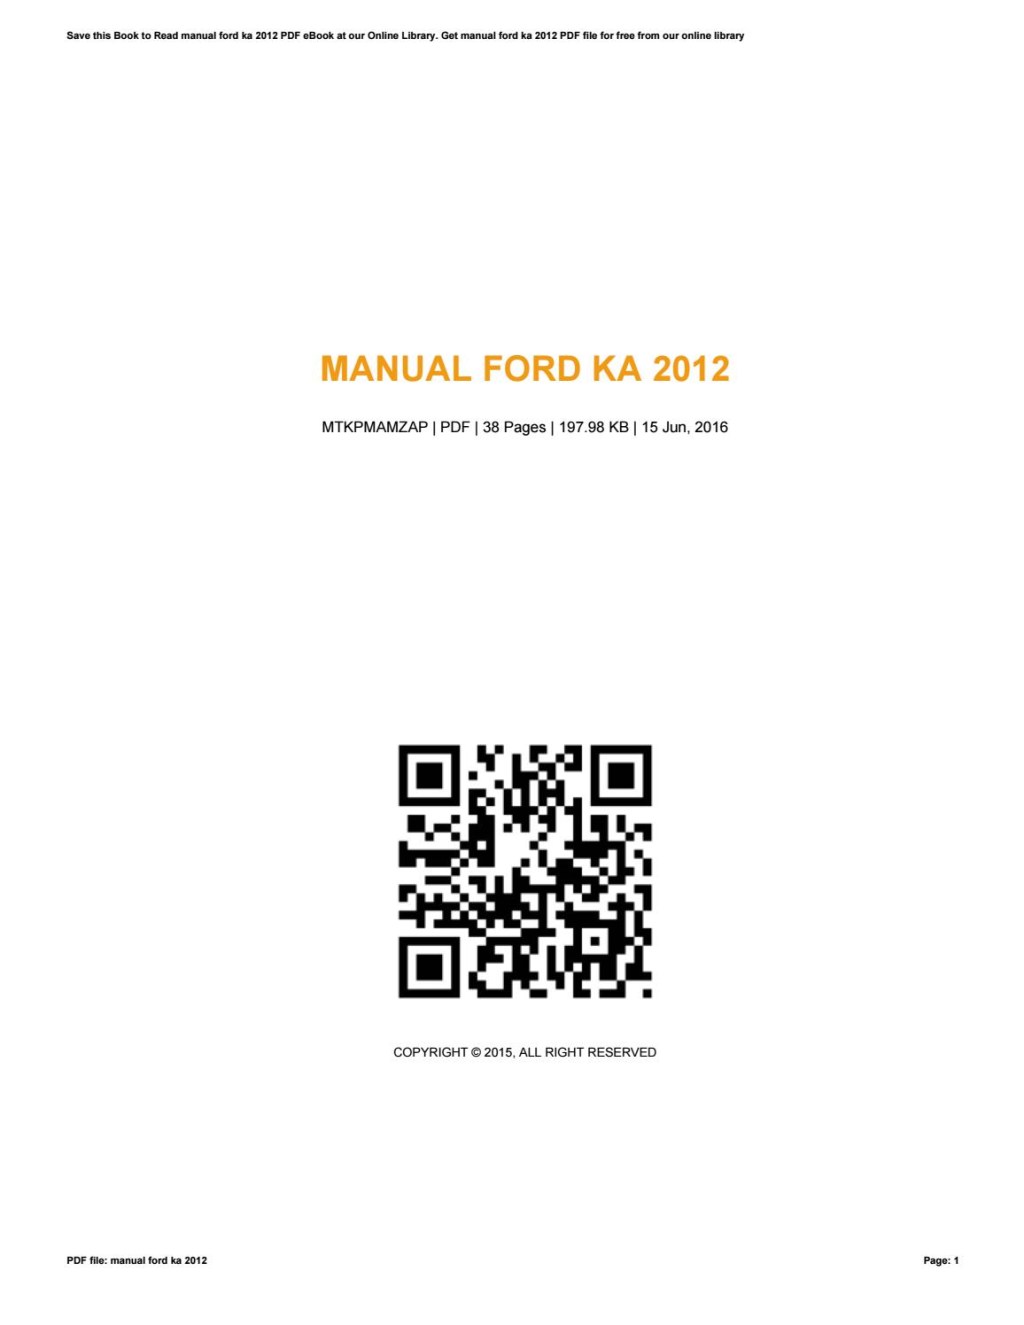 Picture of: Manual ford ka  by rkomo – Issuu